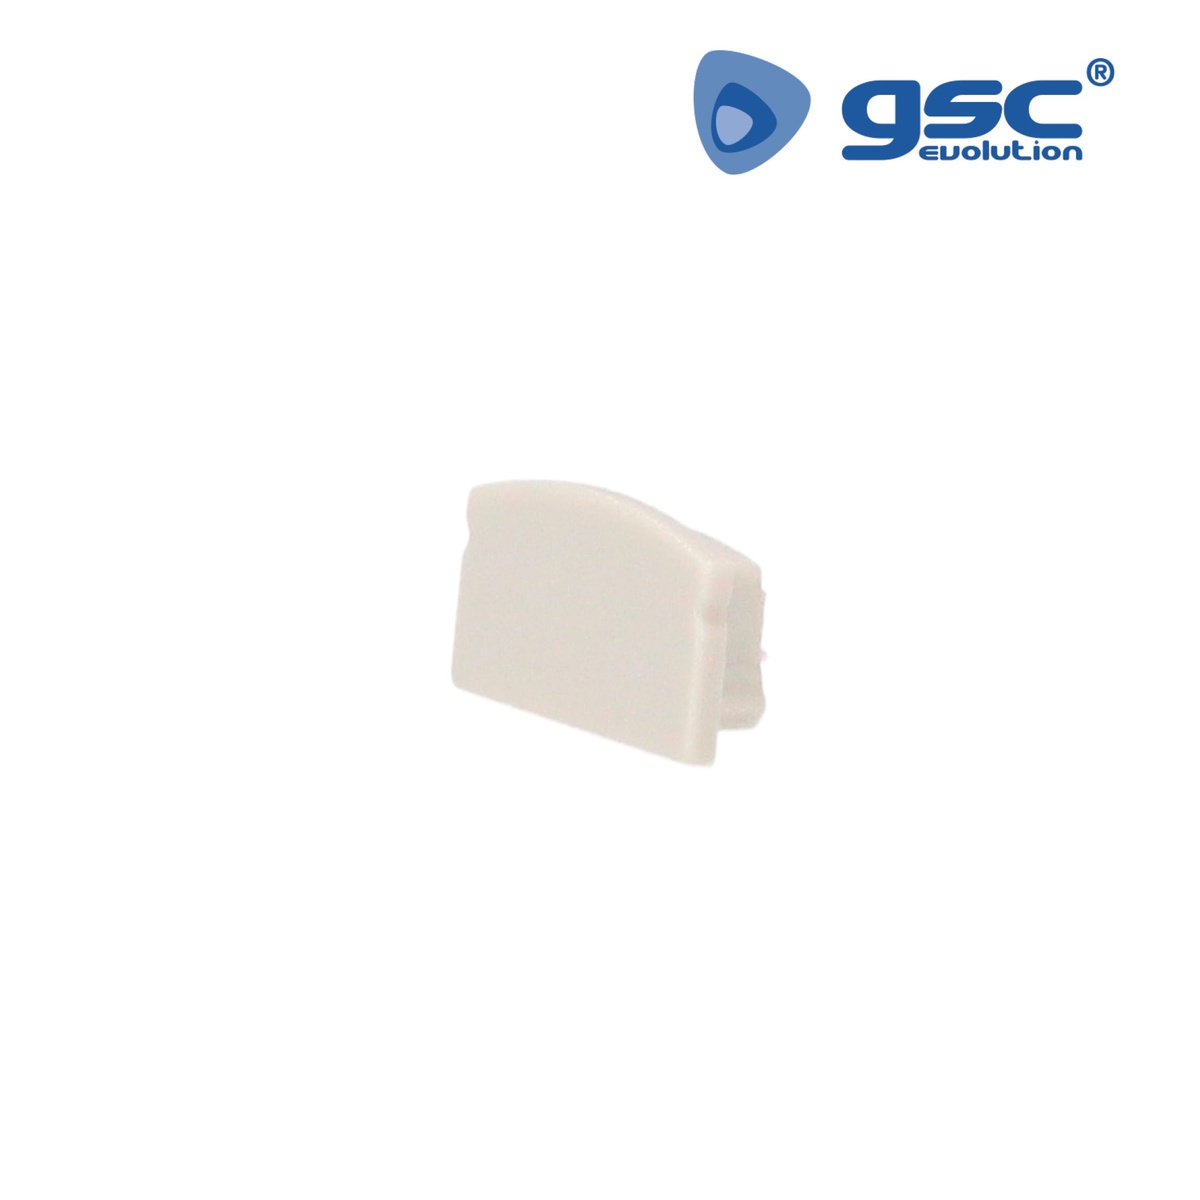 Spare end cap with hole for aluminum profile 204025002